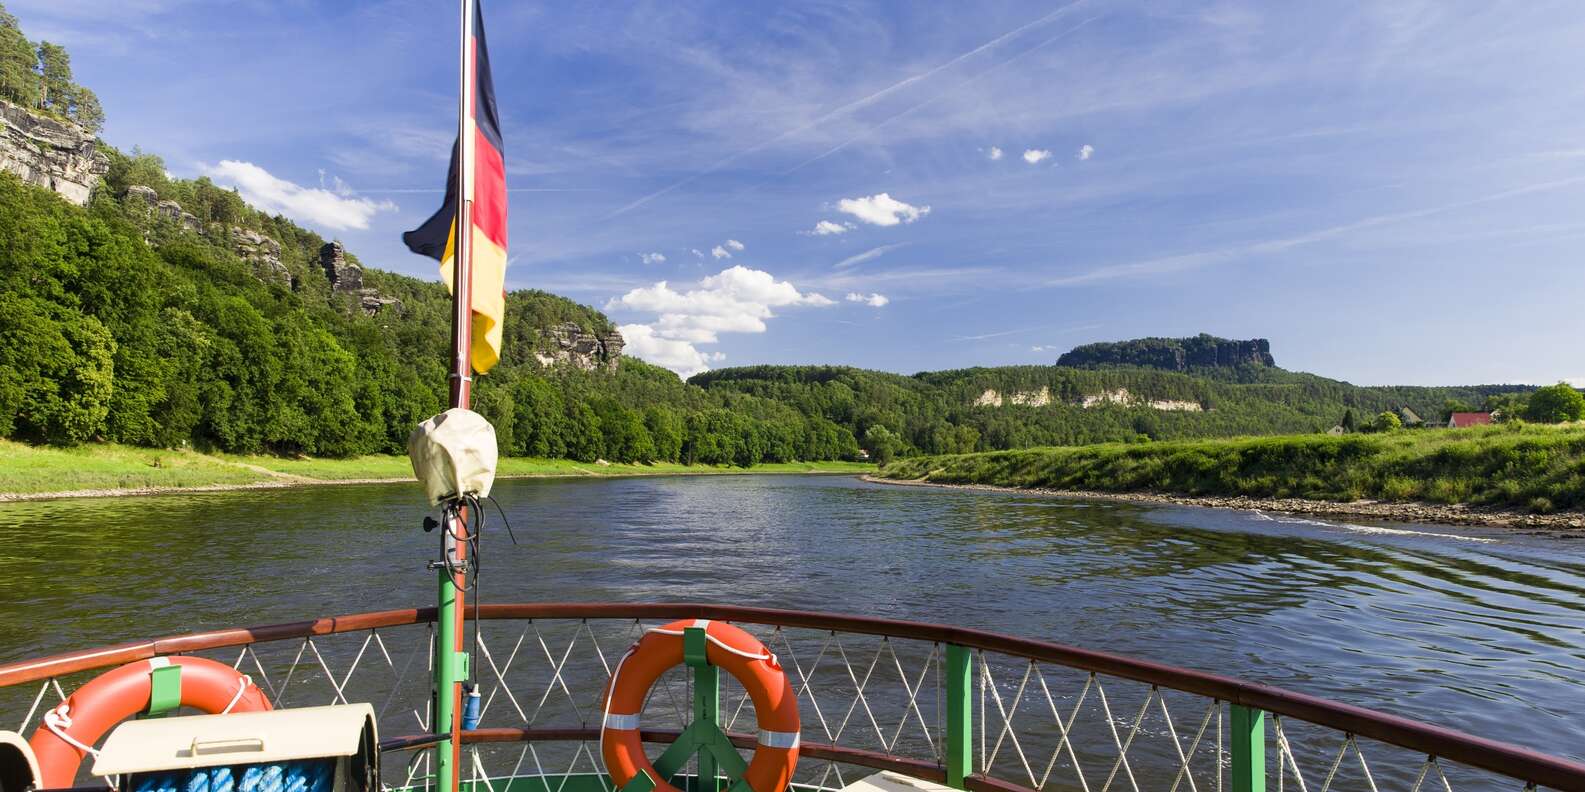 What to do in Bad Schandau